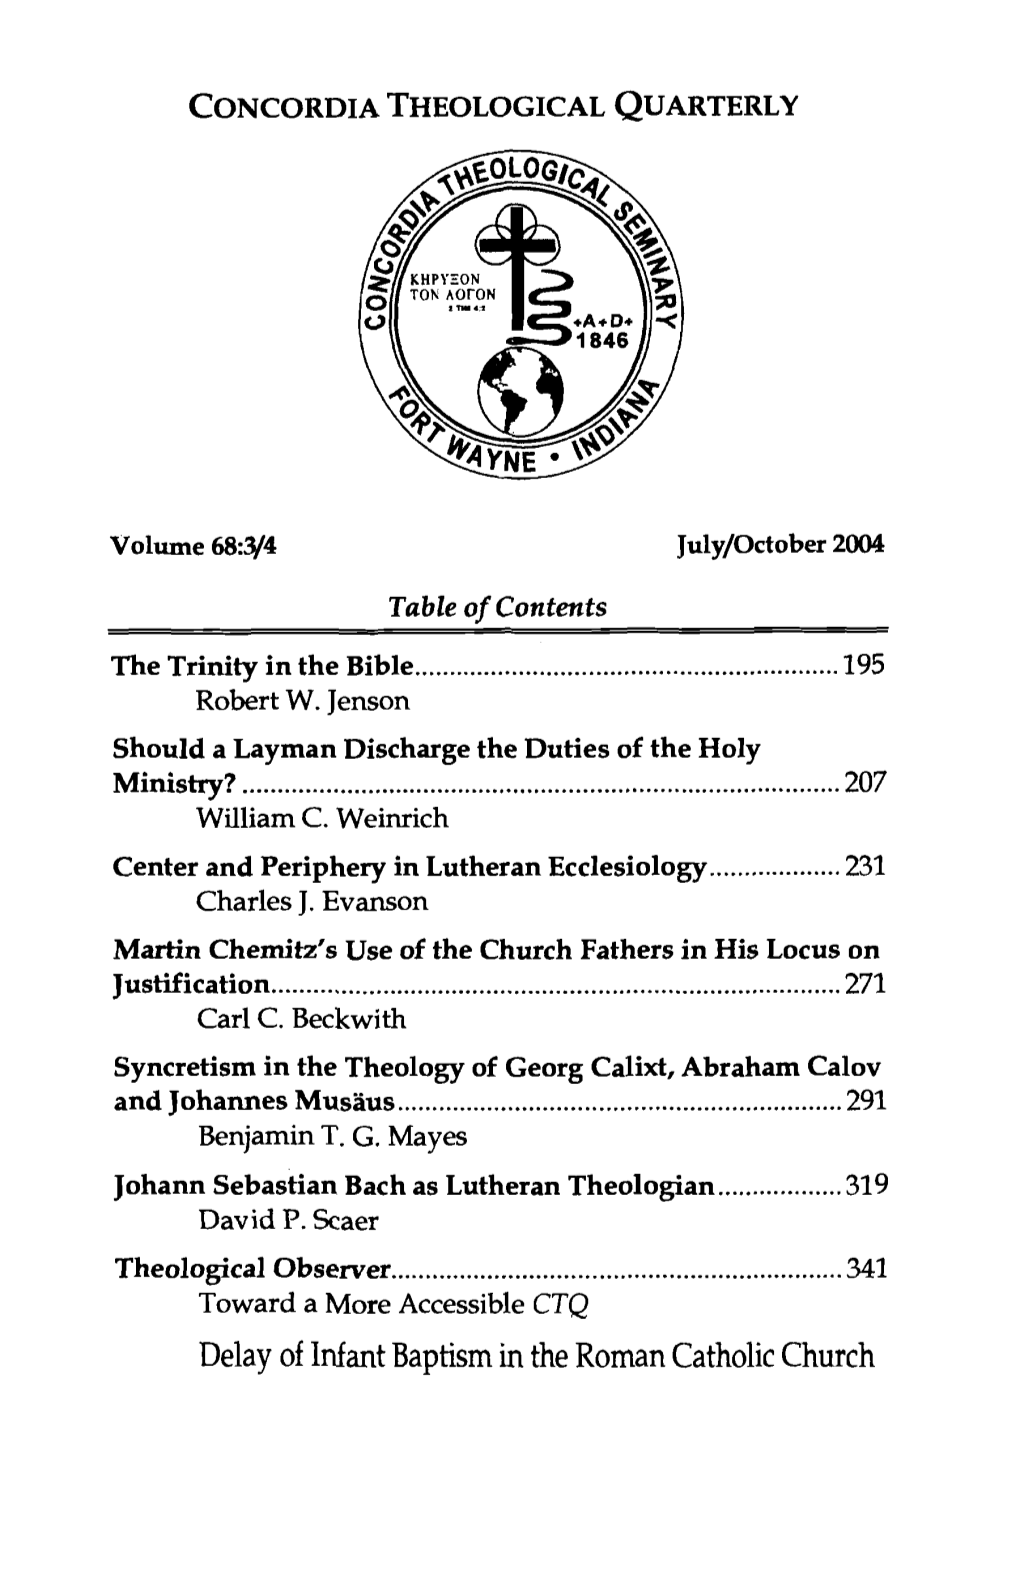 Martin Chemnitz's Use of the Church Fathers in His Locus on Justification